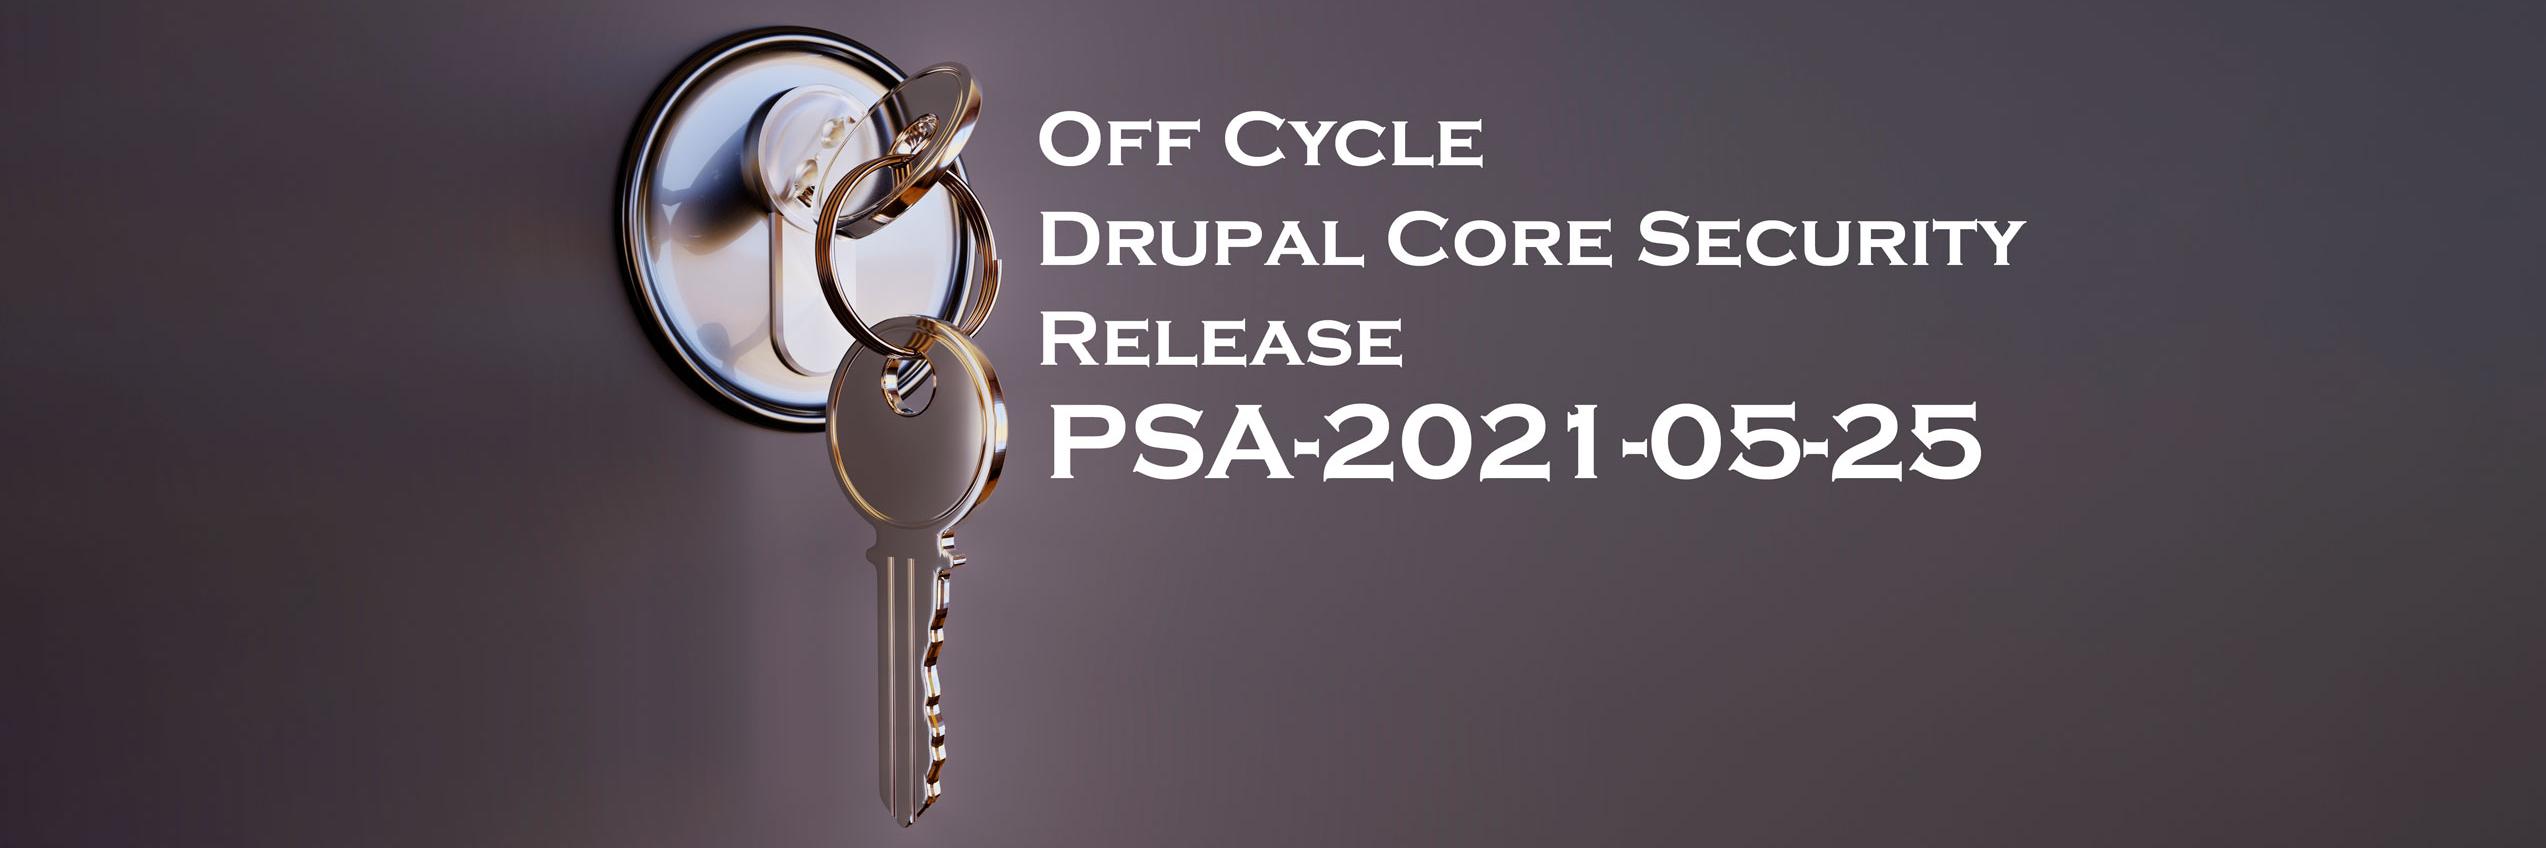 Off Cycle Drupal Core Security Release